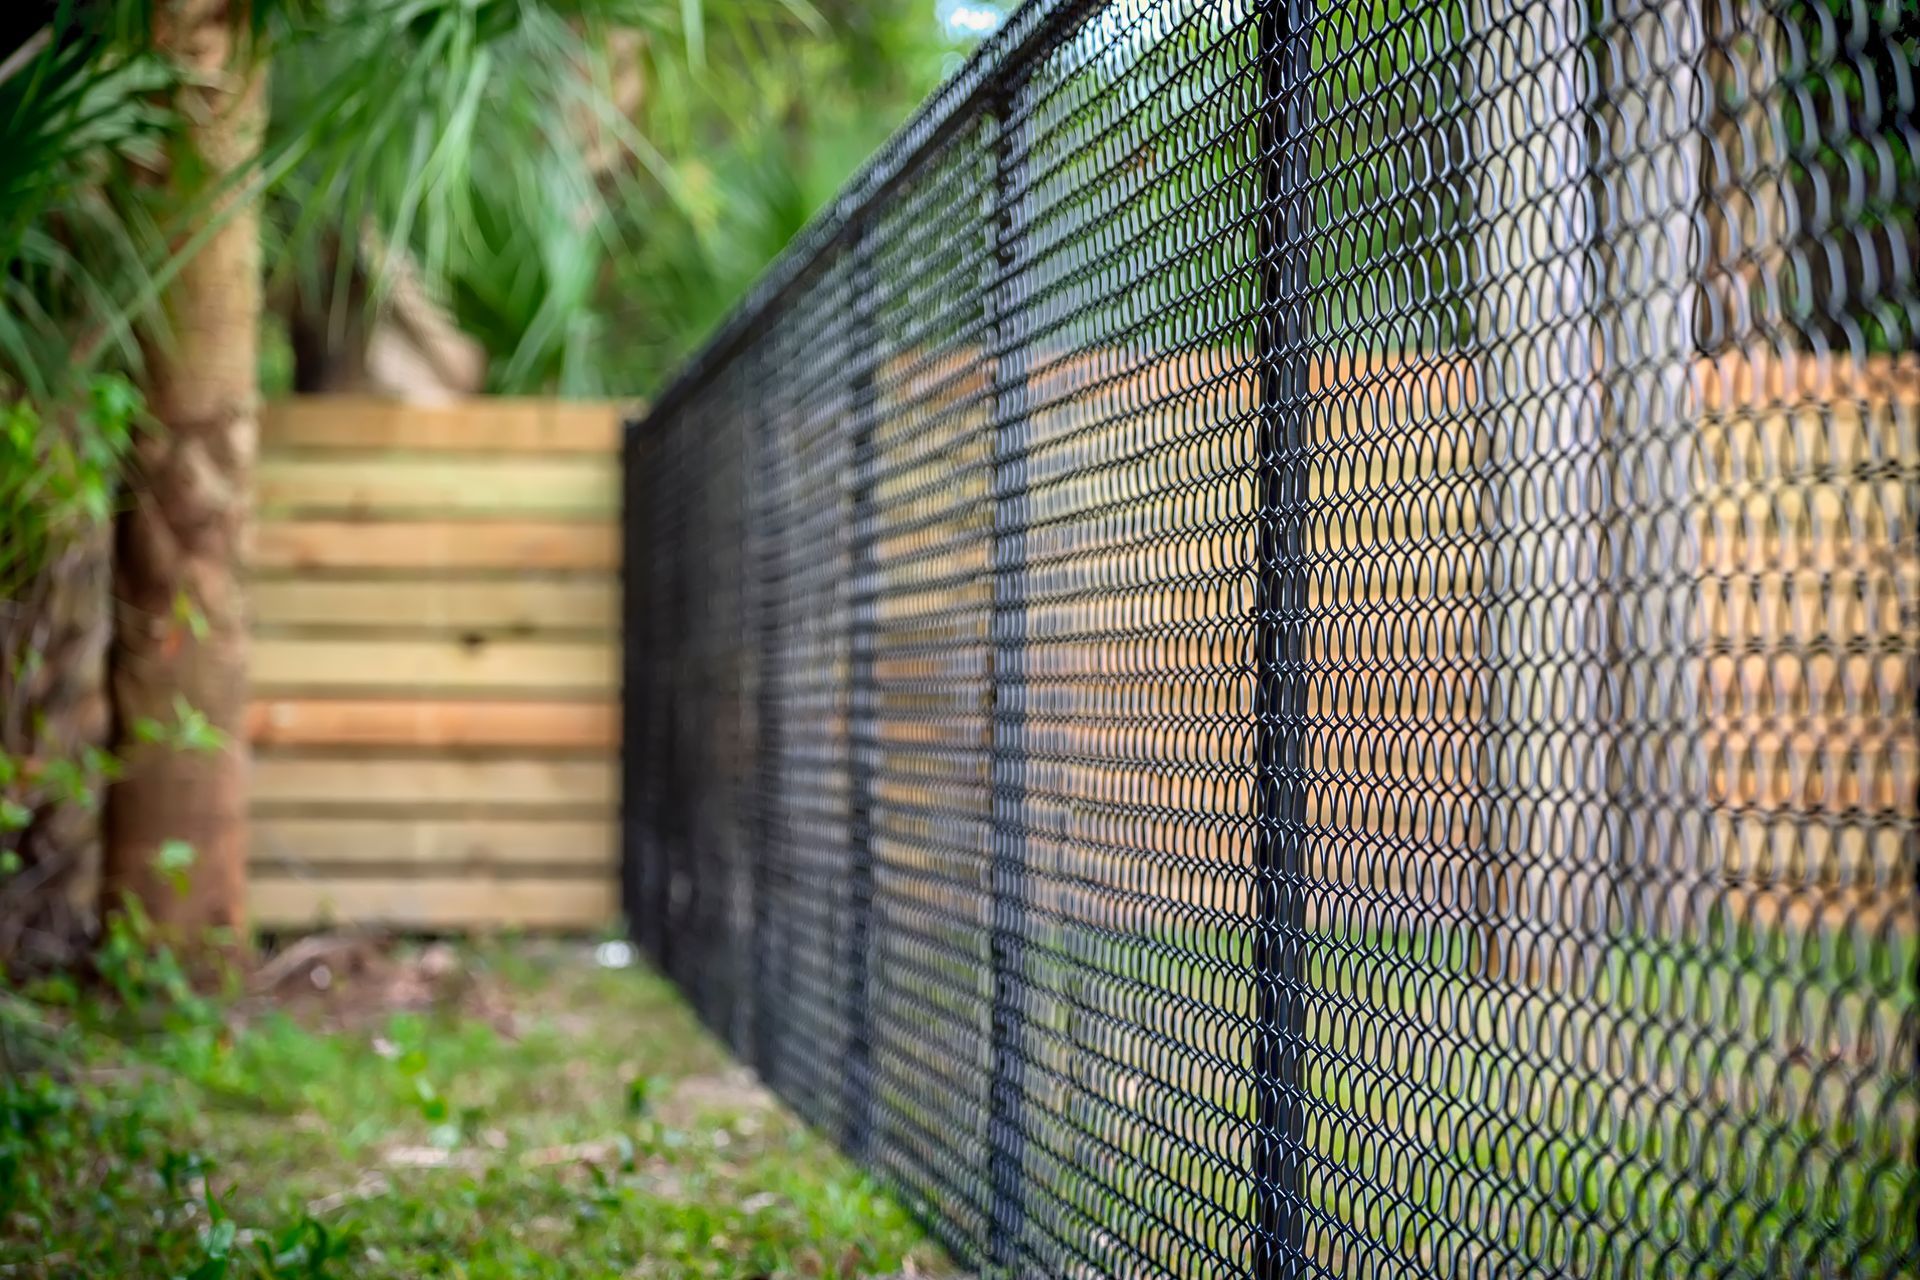 Close-up of a sturdy black chain-link fence creating a protective boundary.